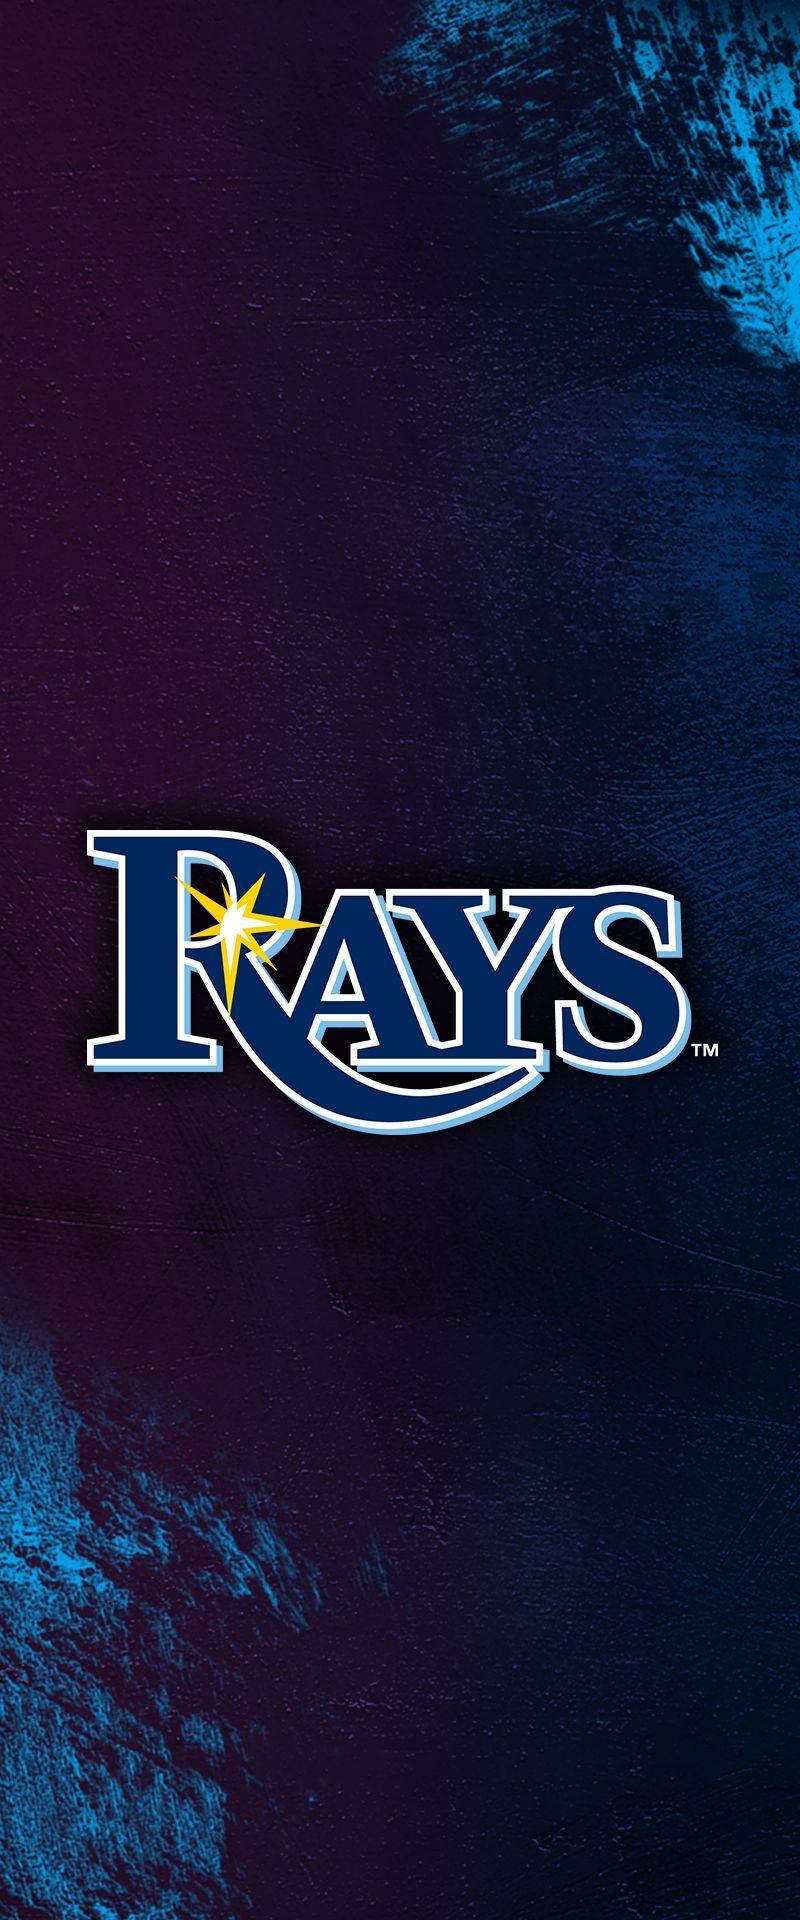 Tampa Bay Rays Wallpapers Top Free Tampa Bay Rays Backgrounds Wallpaperaccess